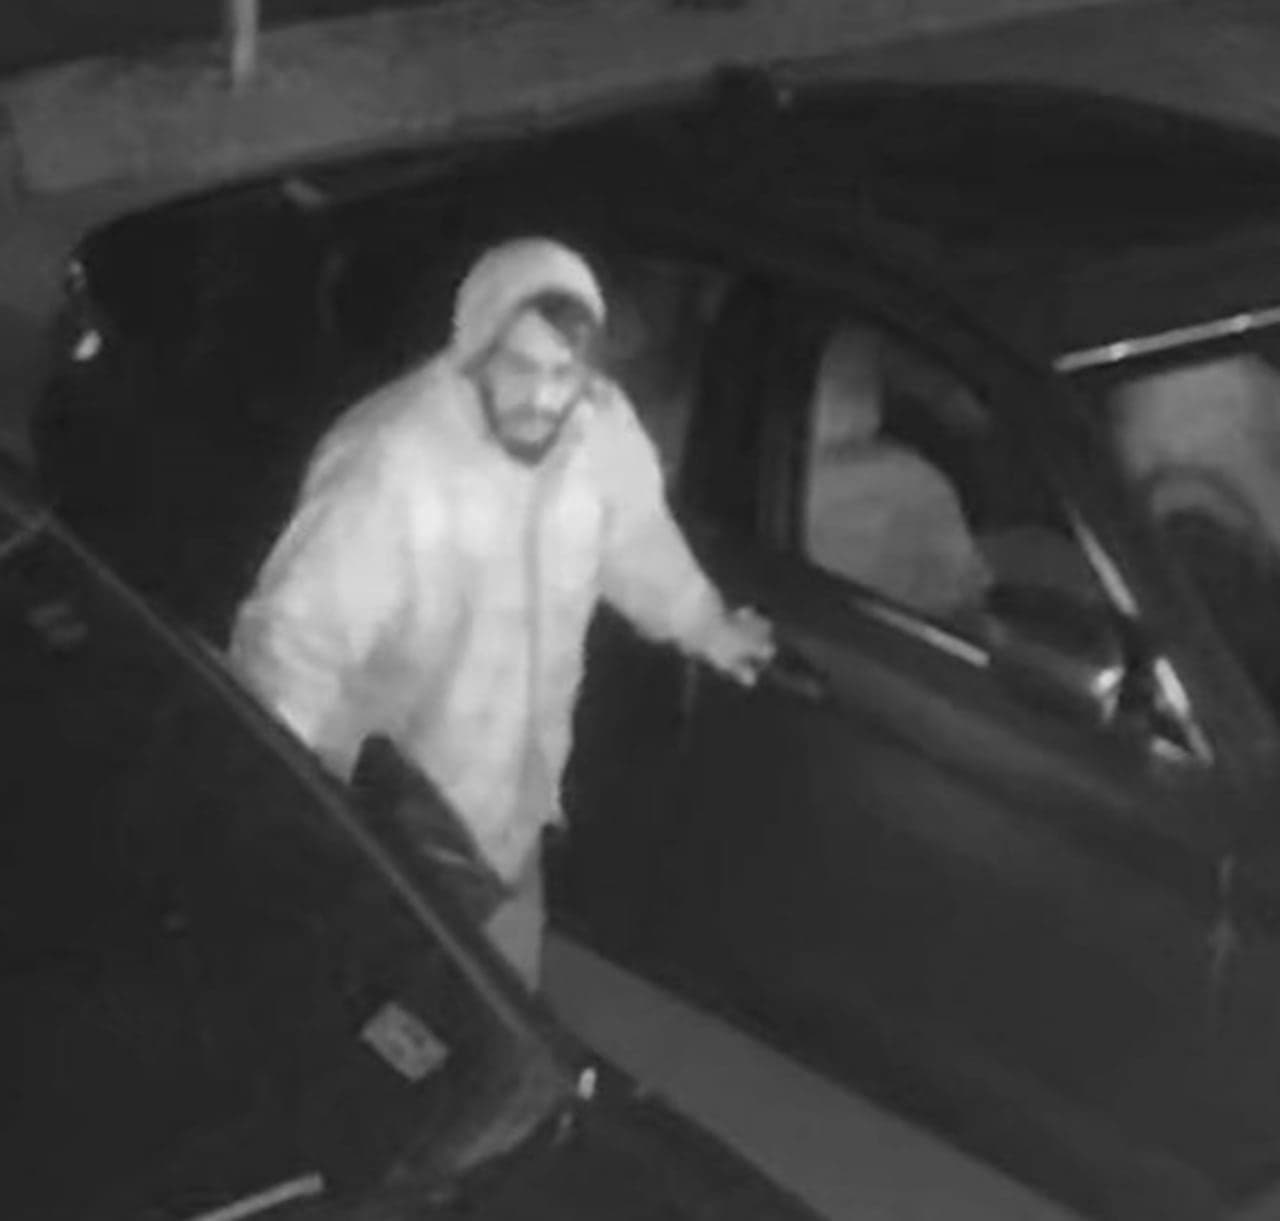 Howell police captured this video image, among others, of a couple checking cars and stealing from some of them last weekend.